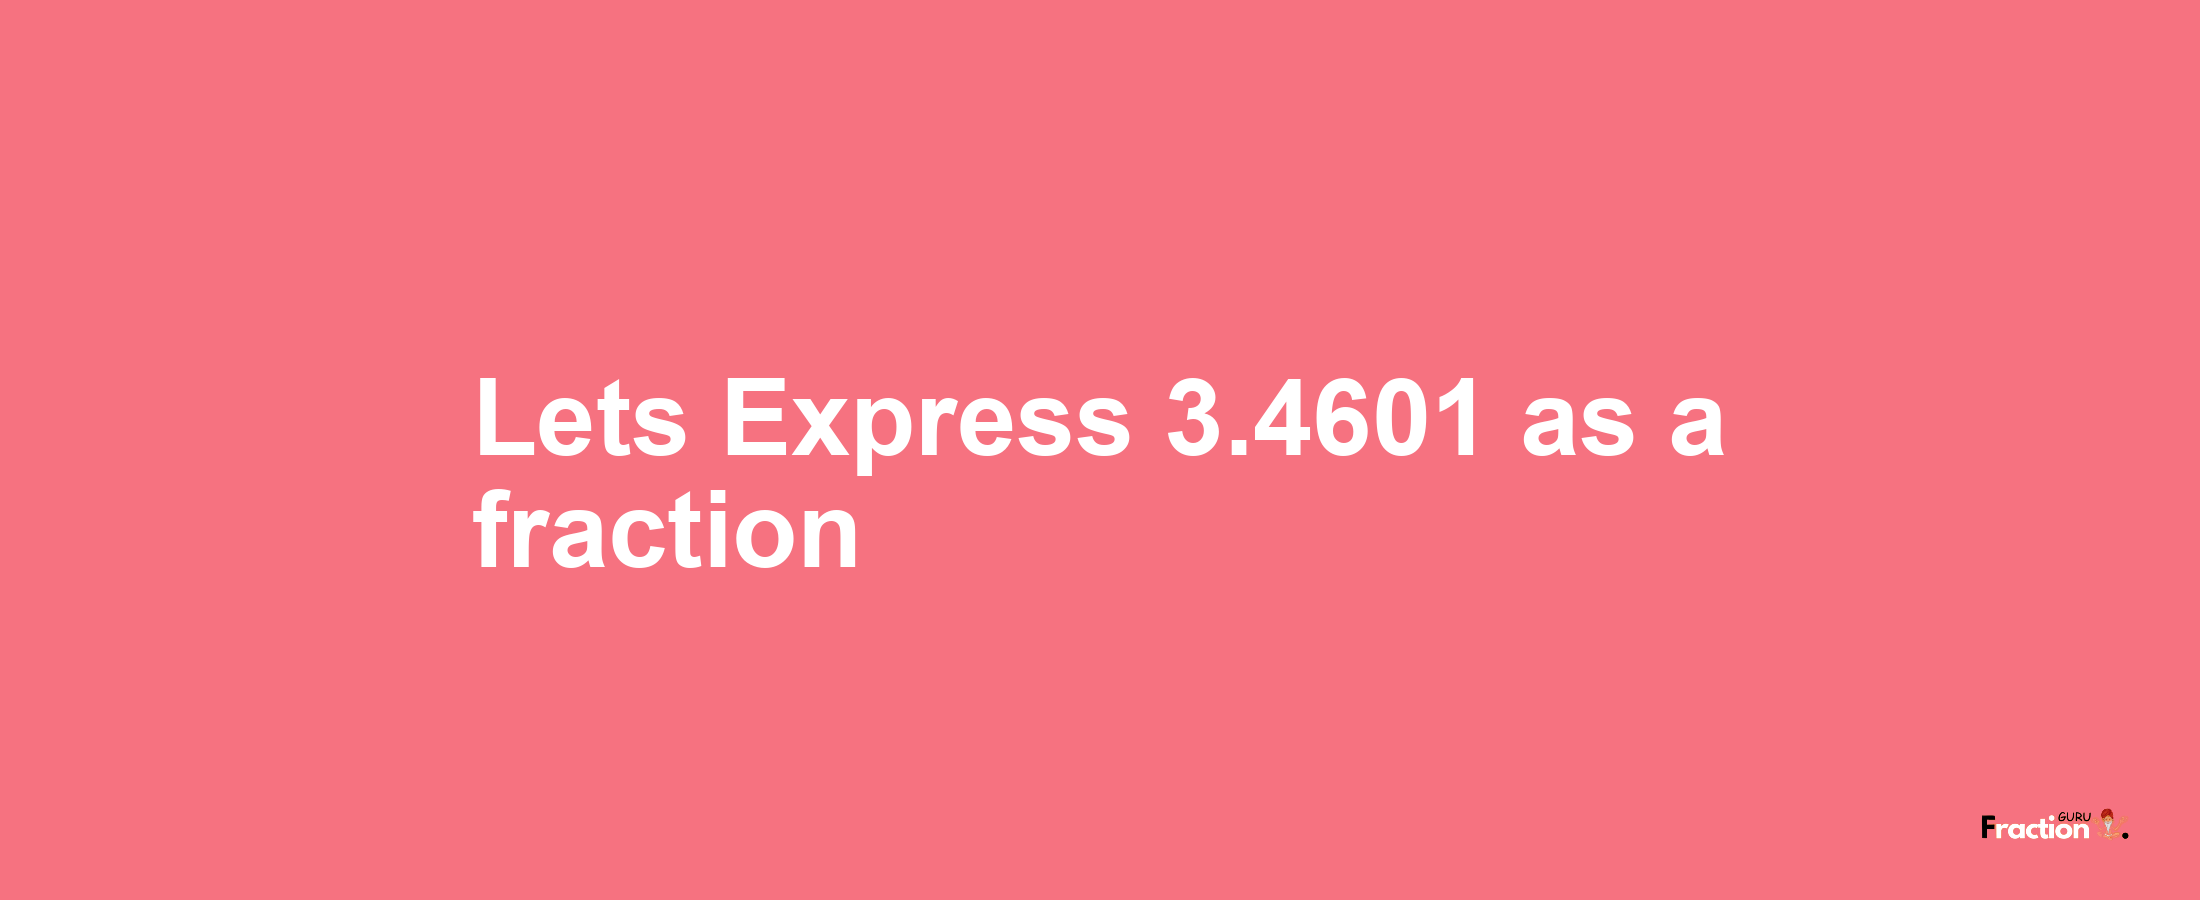 Lets Express 3.4601 as afraction